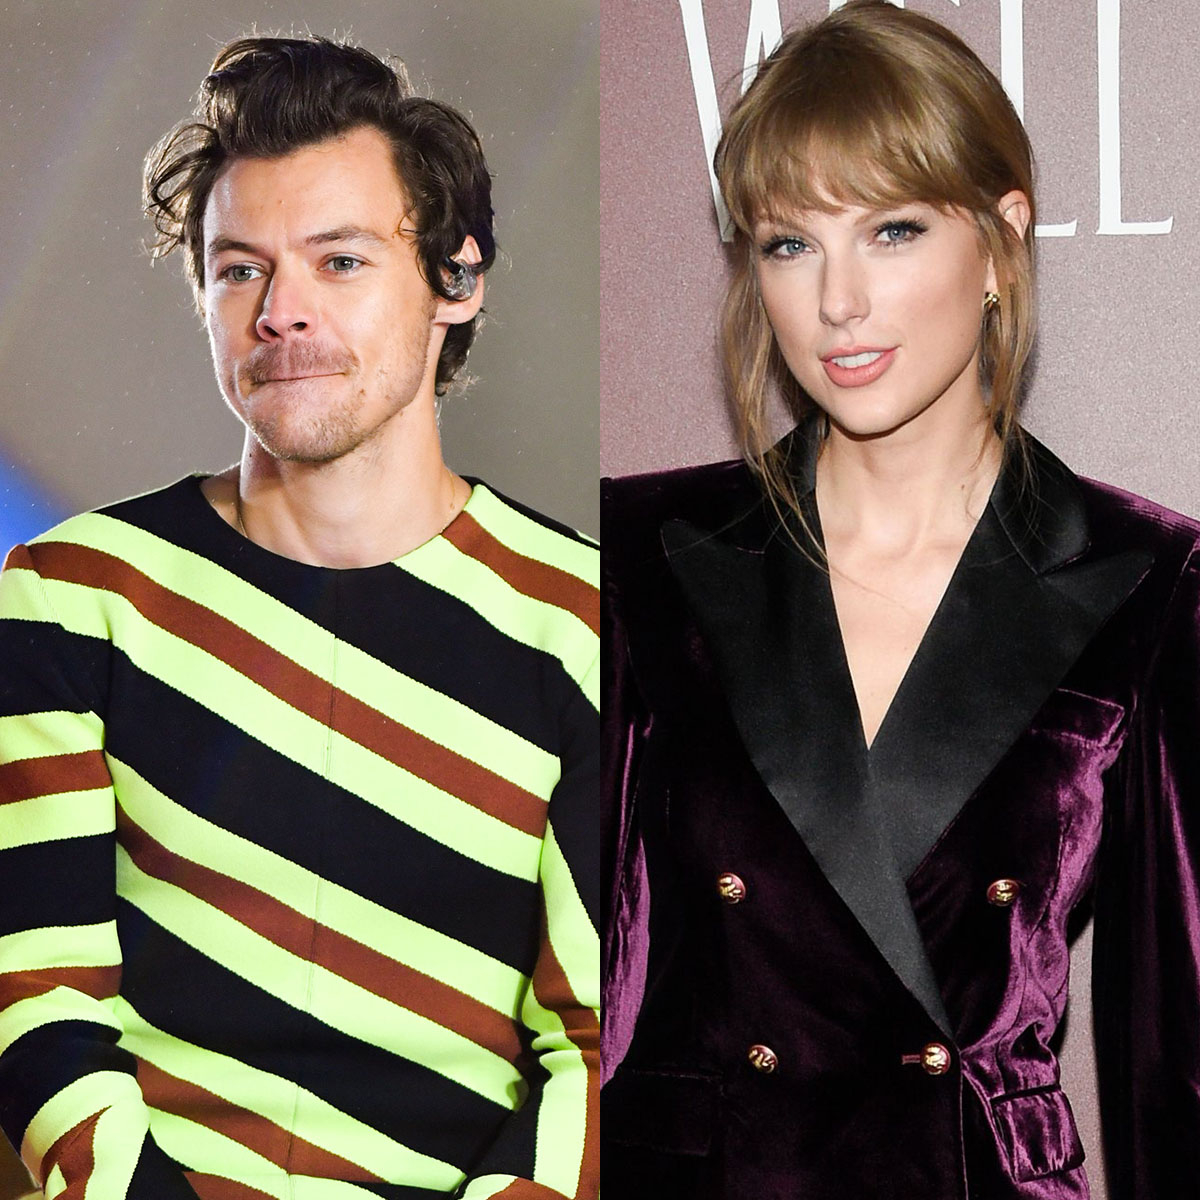 Harry Styles Responds to Fan Theory About His and Taylor Swift’s Songs